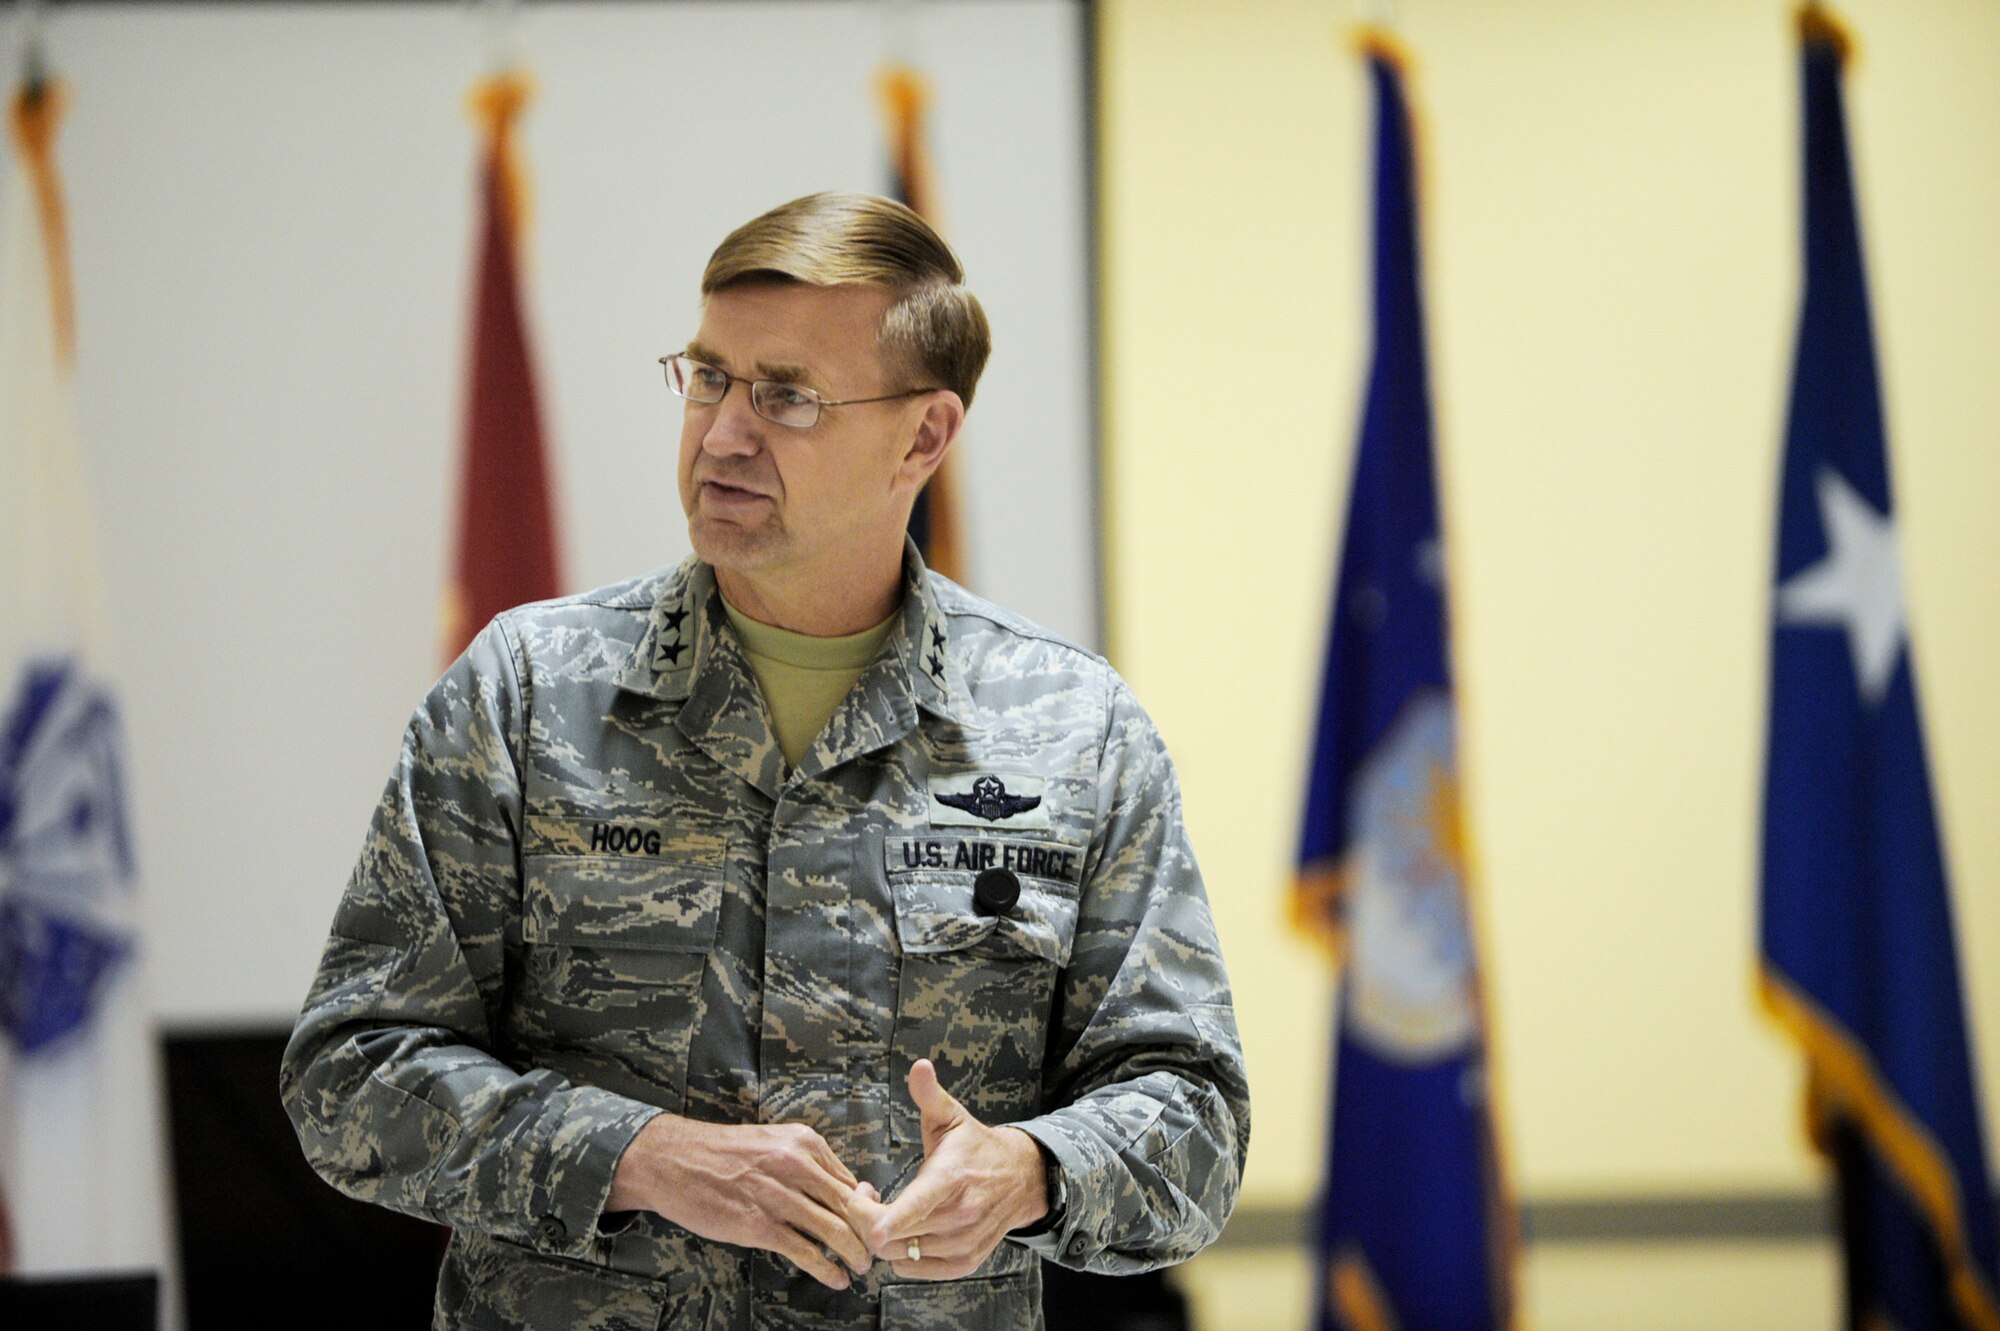 Maj. Gen. Stephen L. Hoog, speaks at the Theater Space Conference Feb. 8, 2010, at a base in Southwest Asia. General Hoog is deputy commander of both U.S. Air Forces Central Command and Combined Force Air Component commander and the vice commander of the 9th Air Expeditionary Task Force. (U.S. Air Force photo/Staff Sgt. Manuel J. Martinez)